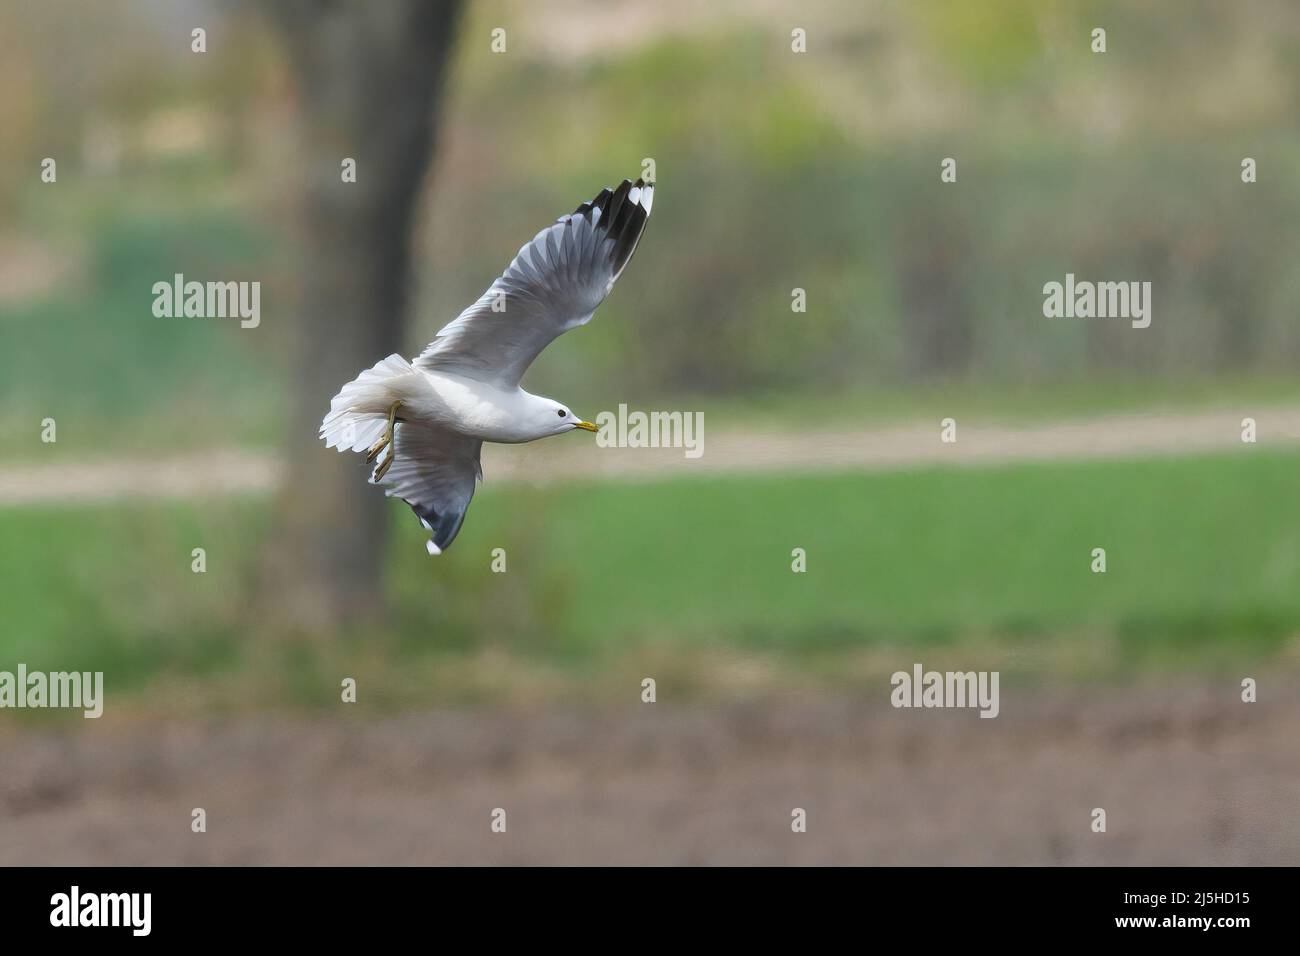 close up of a seagull in flight over the fields Stock Photo